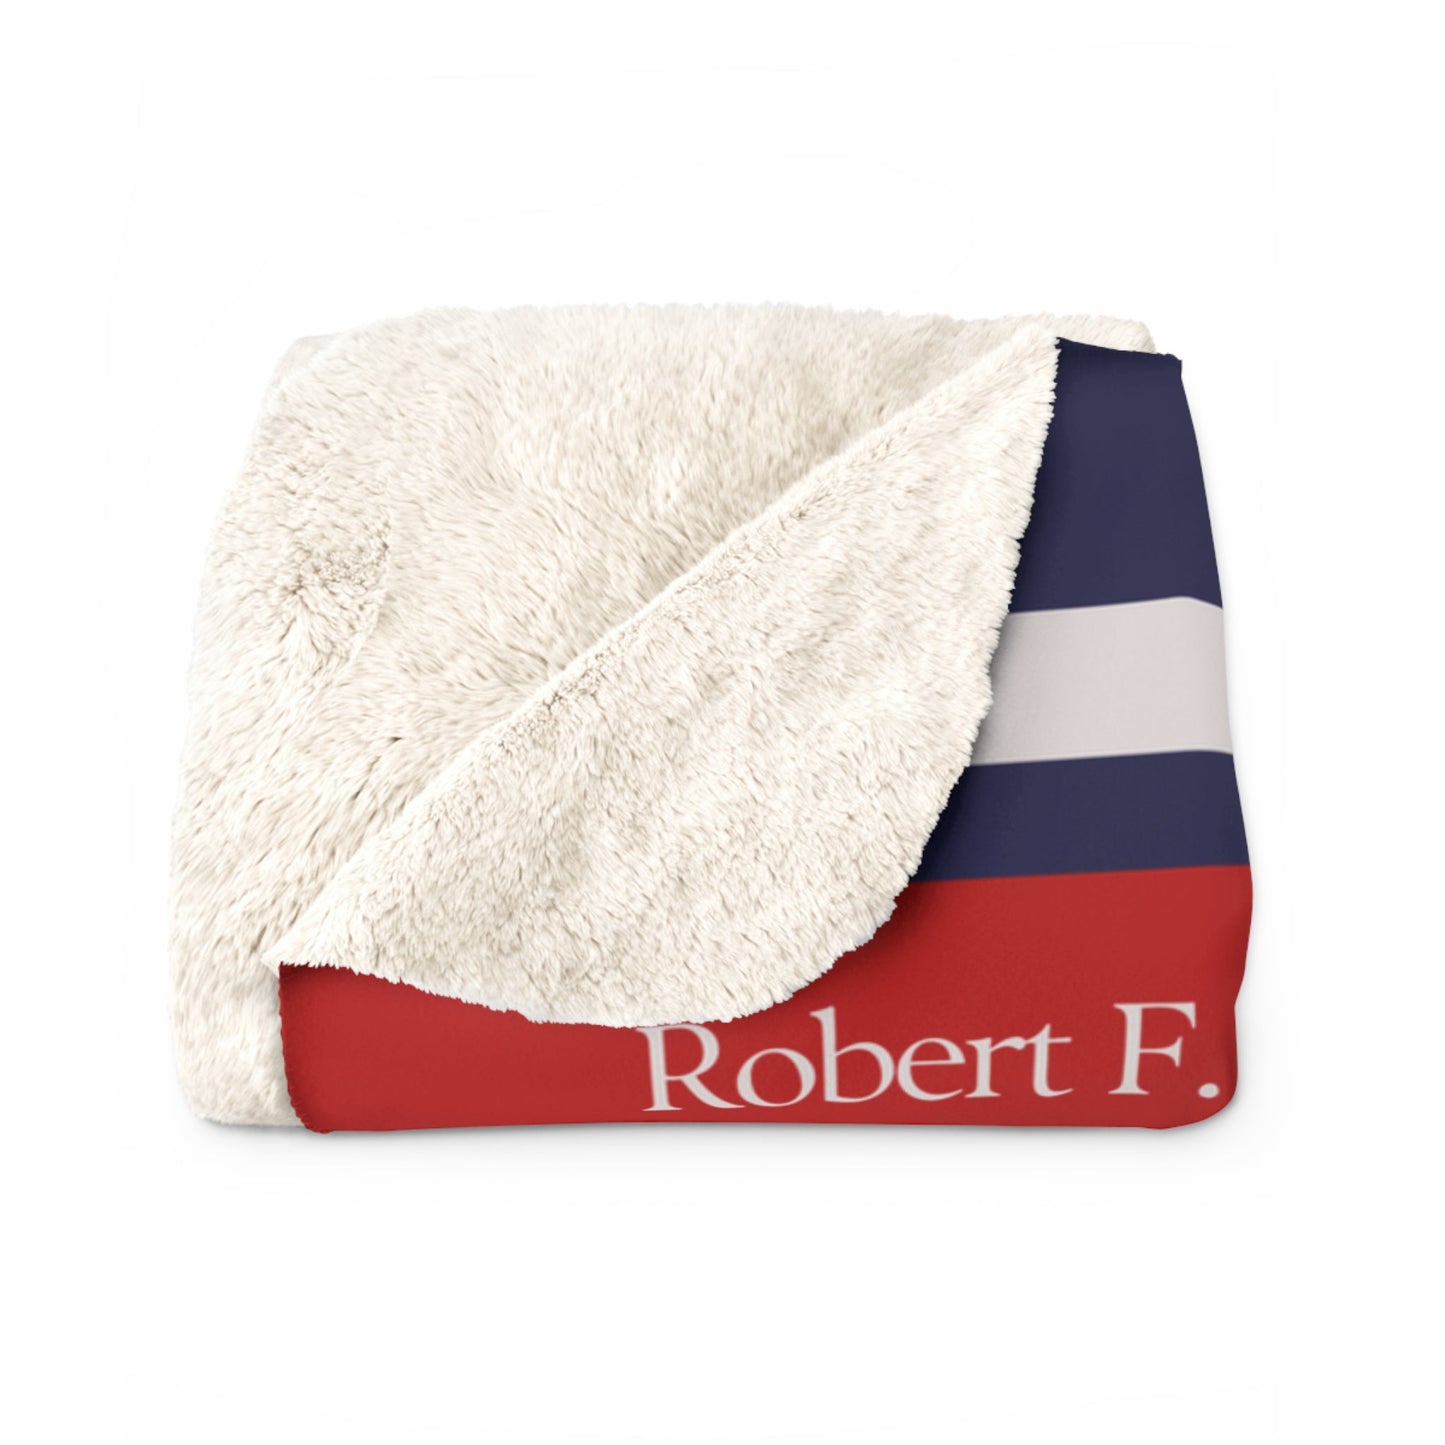 Kennedy for President Navy Sherpa Fleece Blanket - TEAM KENNEDY. All rights reserved